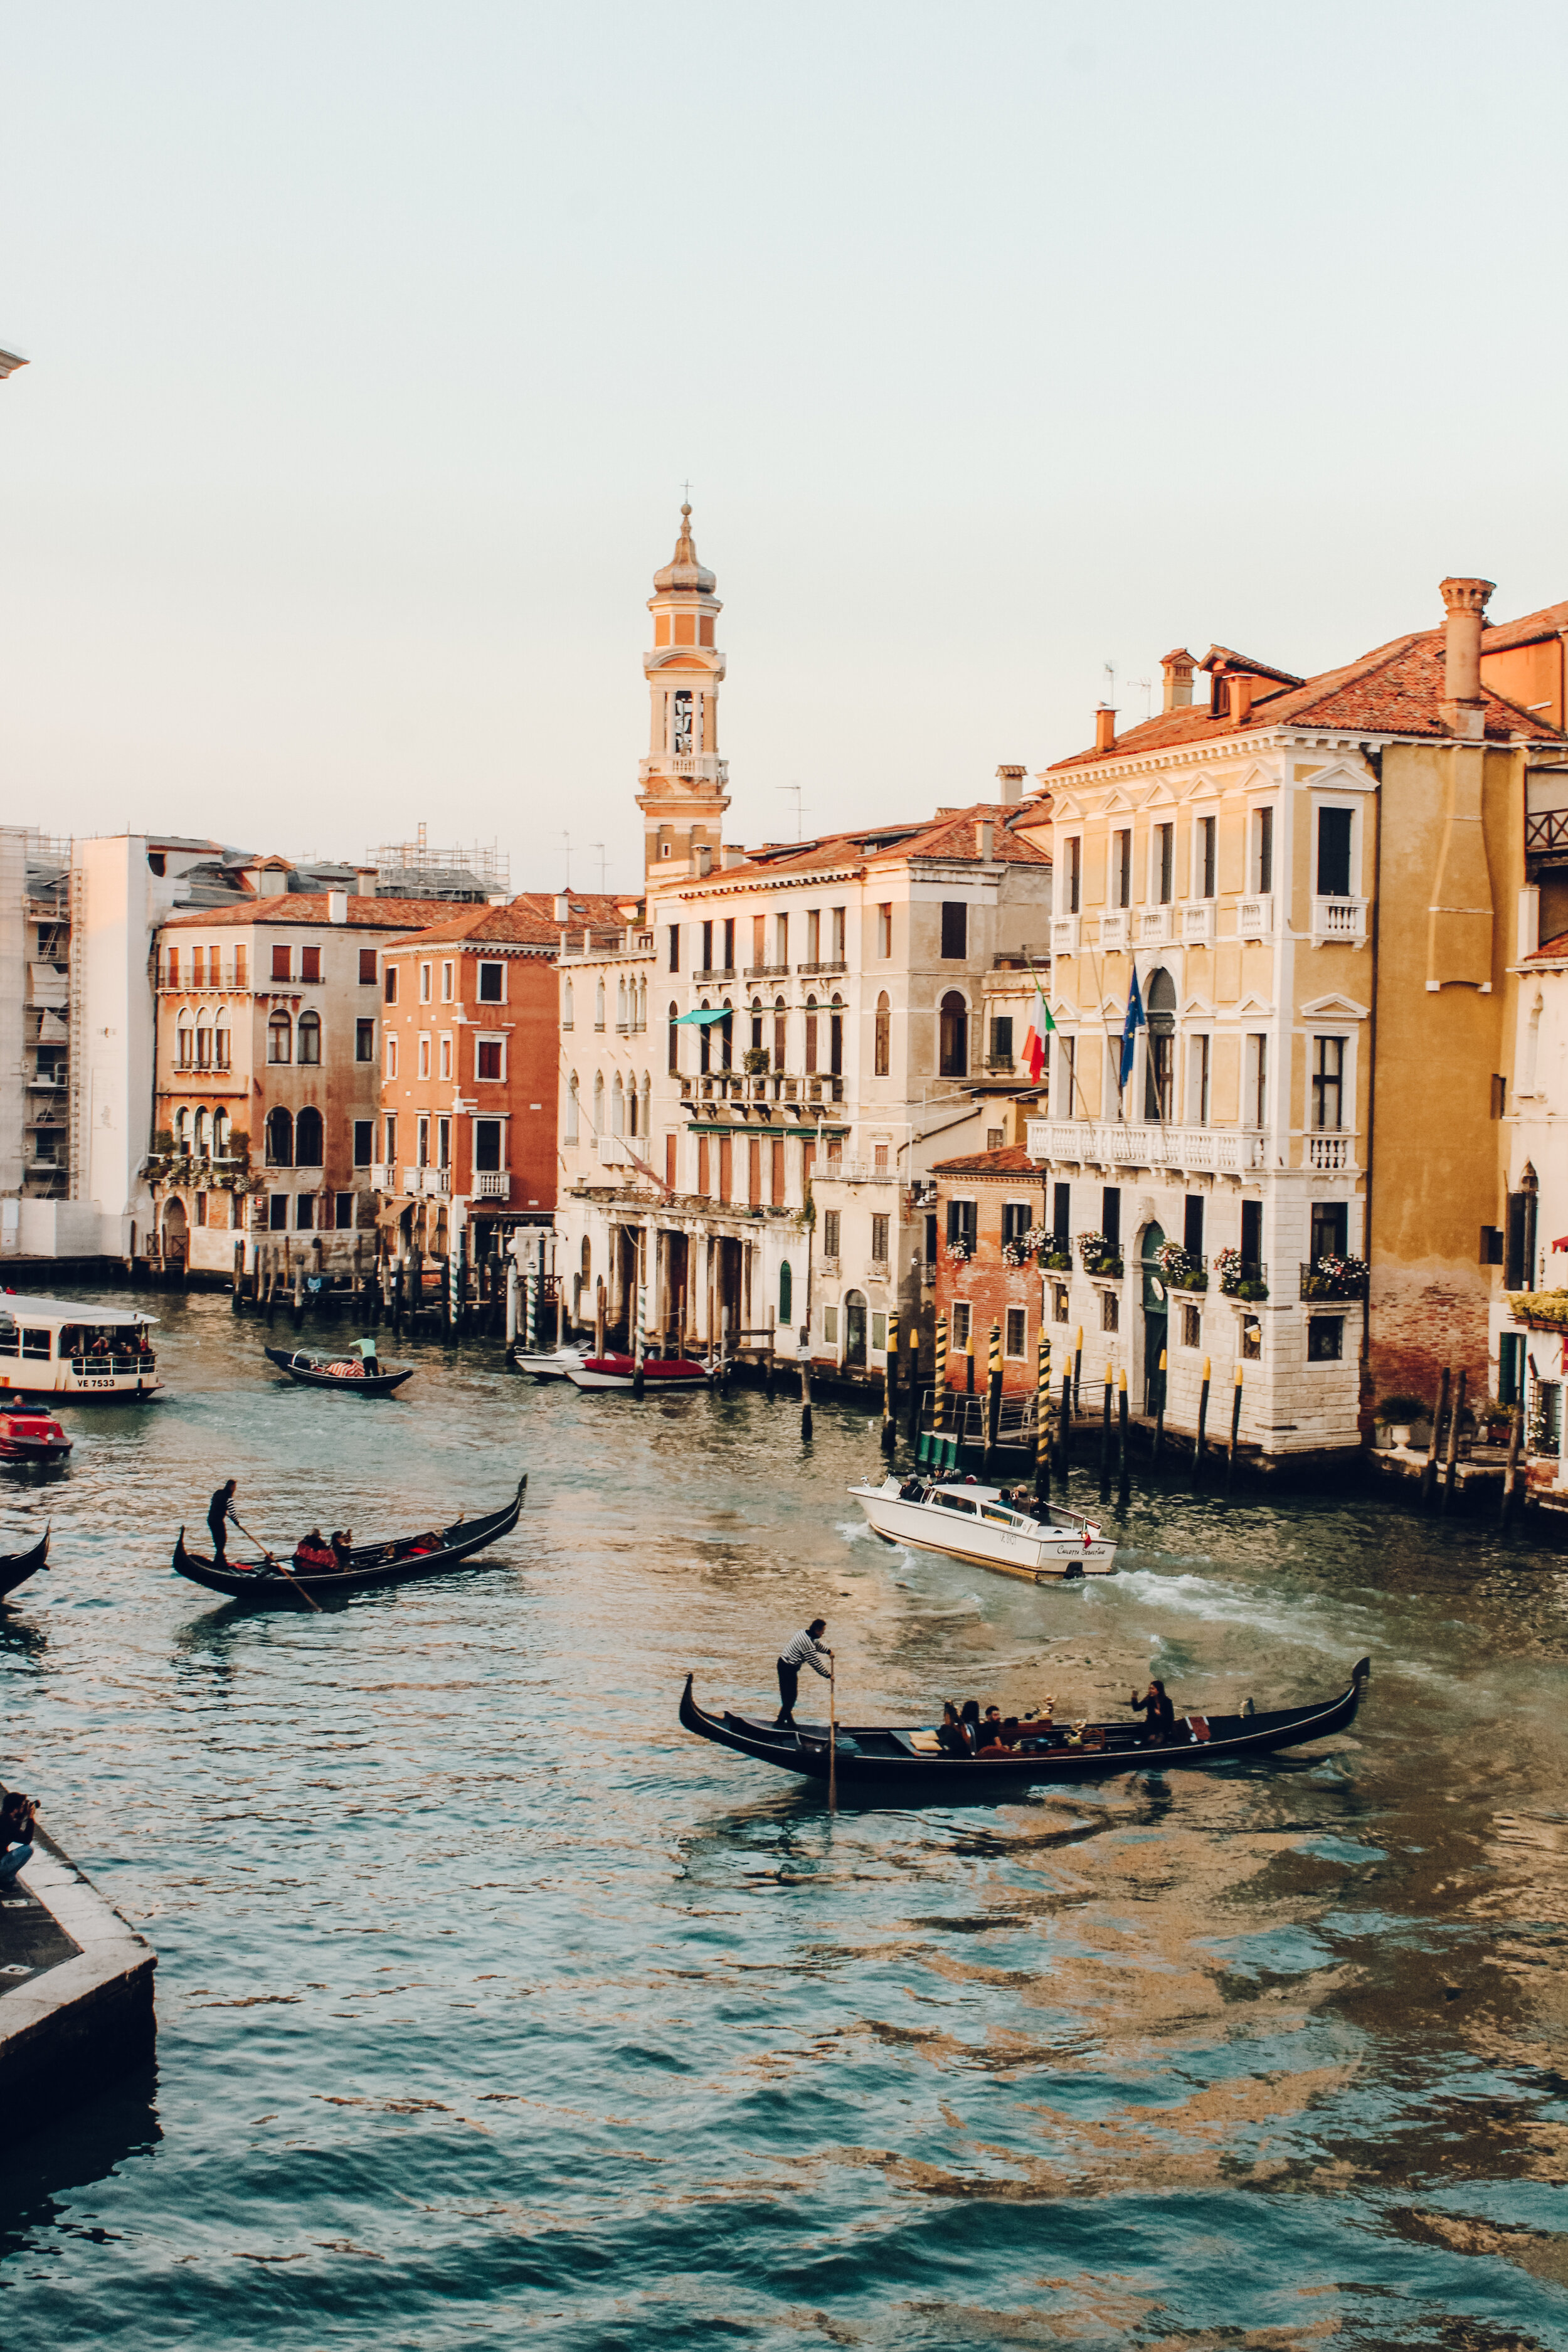 A DAY IN VENICE, ITALY | A PHOTO DIARY — THE CURIOSITY COLLECTION